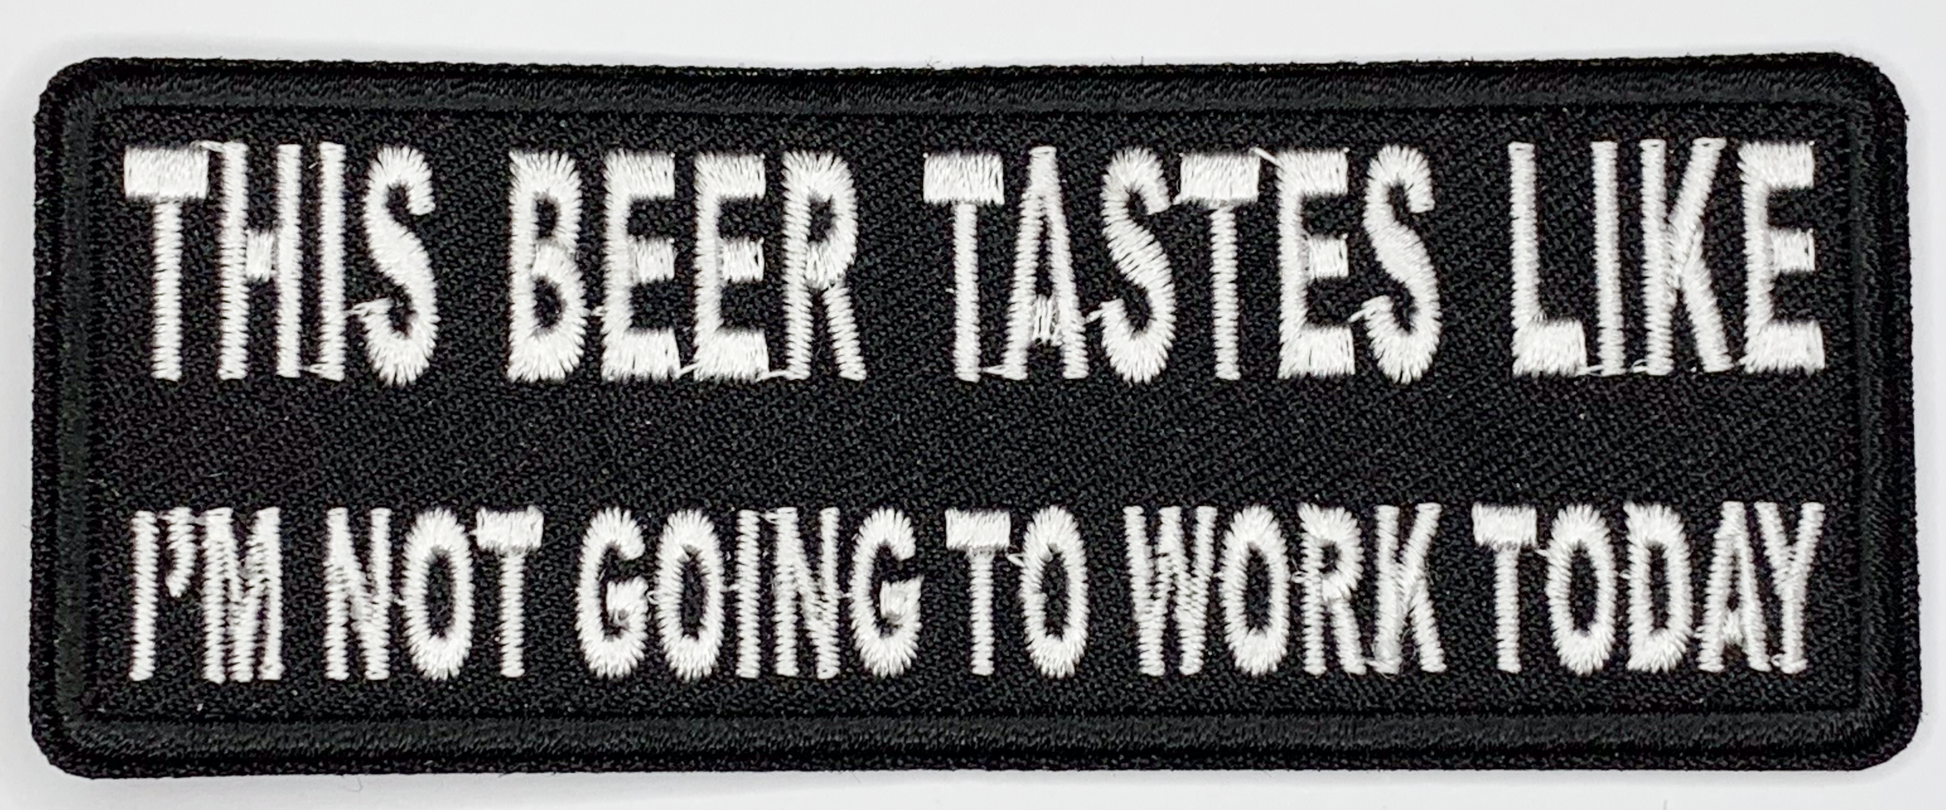 This beer tastes like I'm not going to work today Iron On Patch. Great for attaching to your jackets, shirts, pants, jeans, hats.  Size: 10.4X4cm